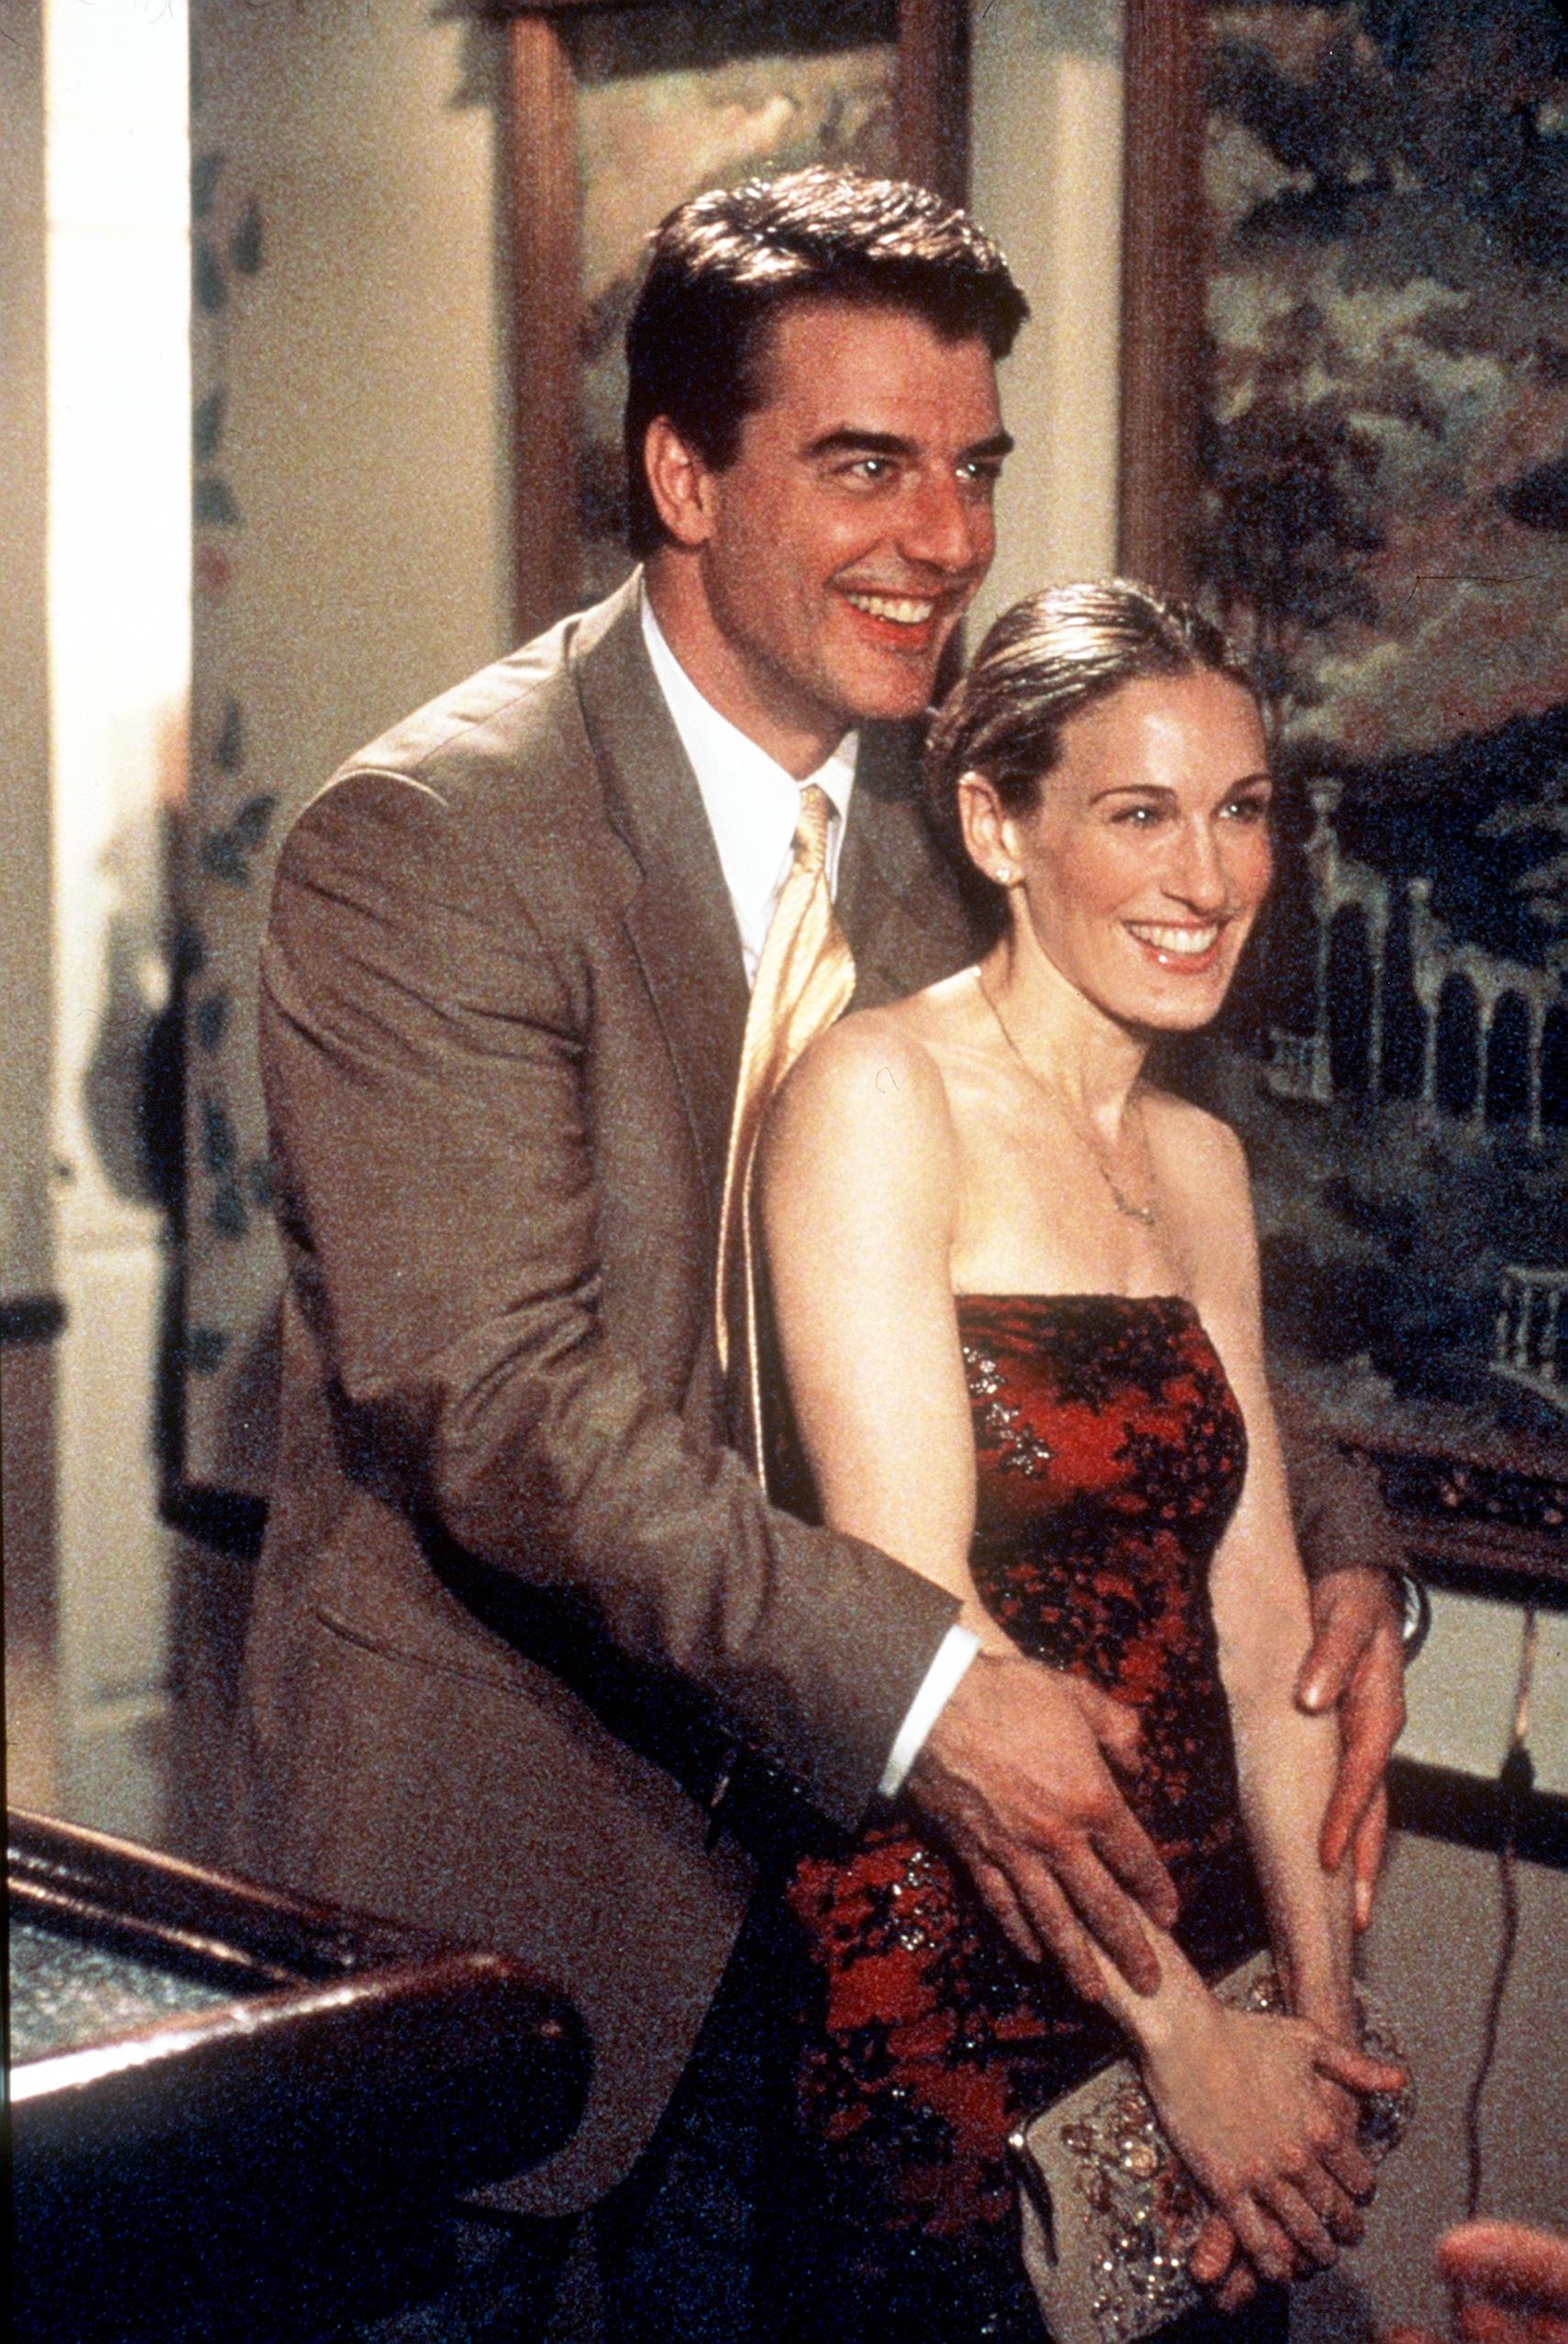 Chris Noth as Mr. Big and Sarah Jessica Parker as Carrie Bradshaw in a season 2 episode of 'Sex and the City'